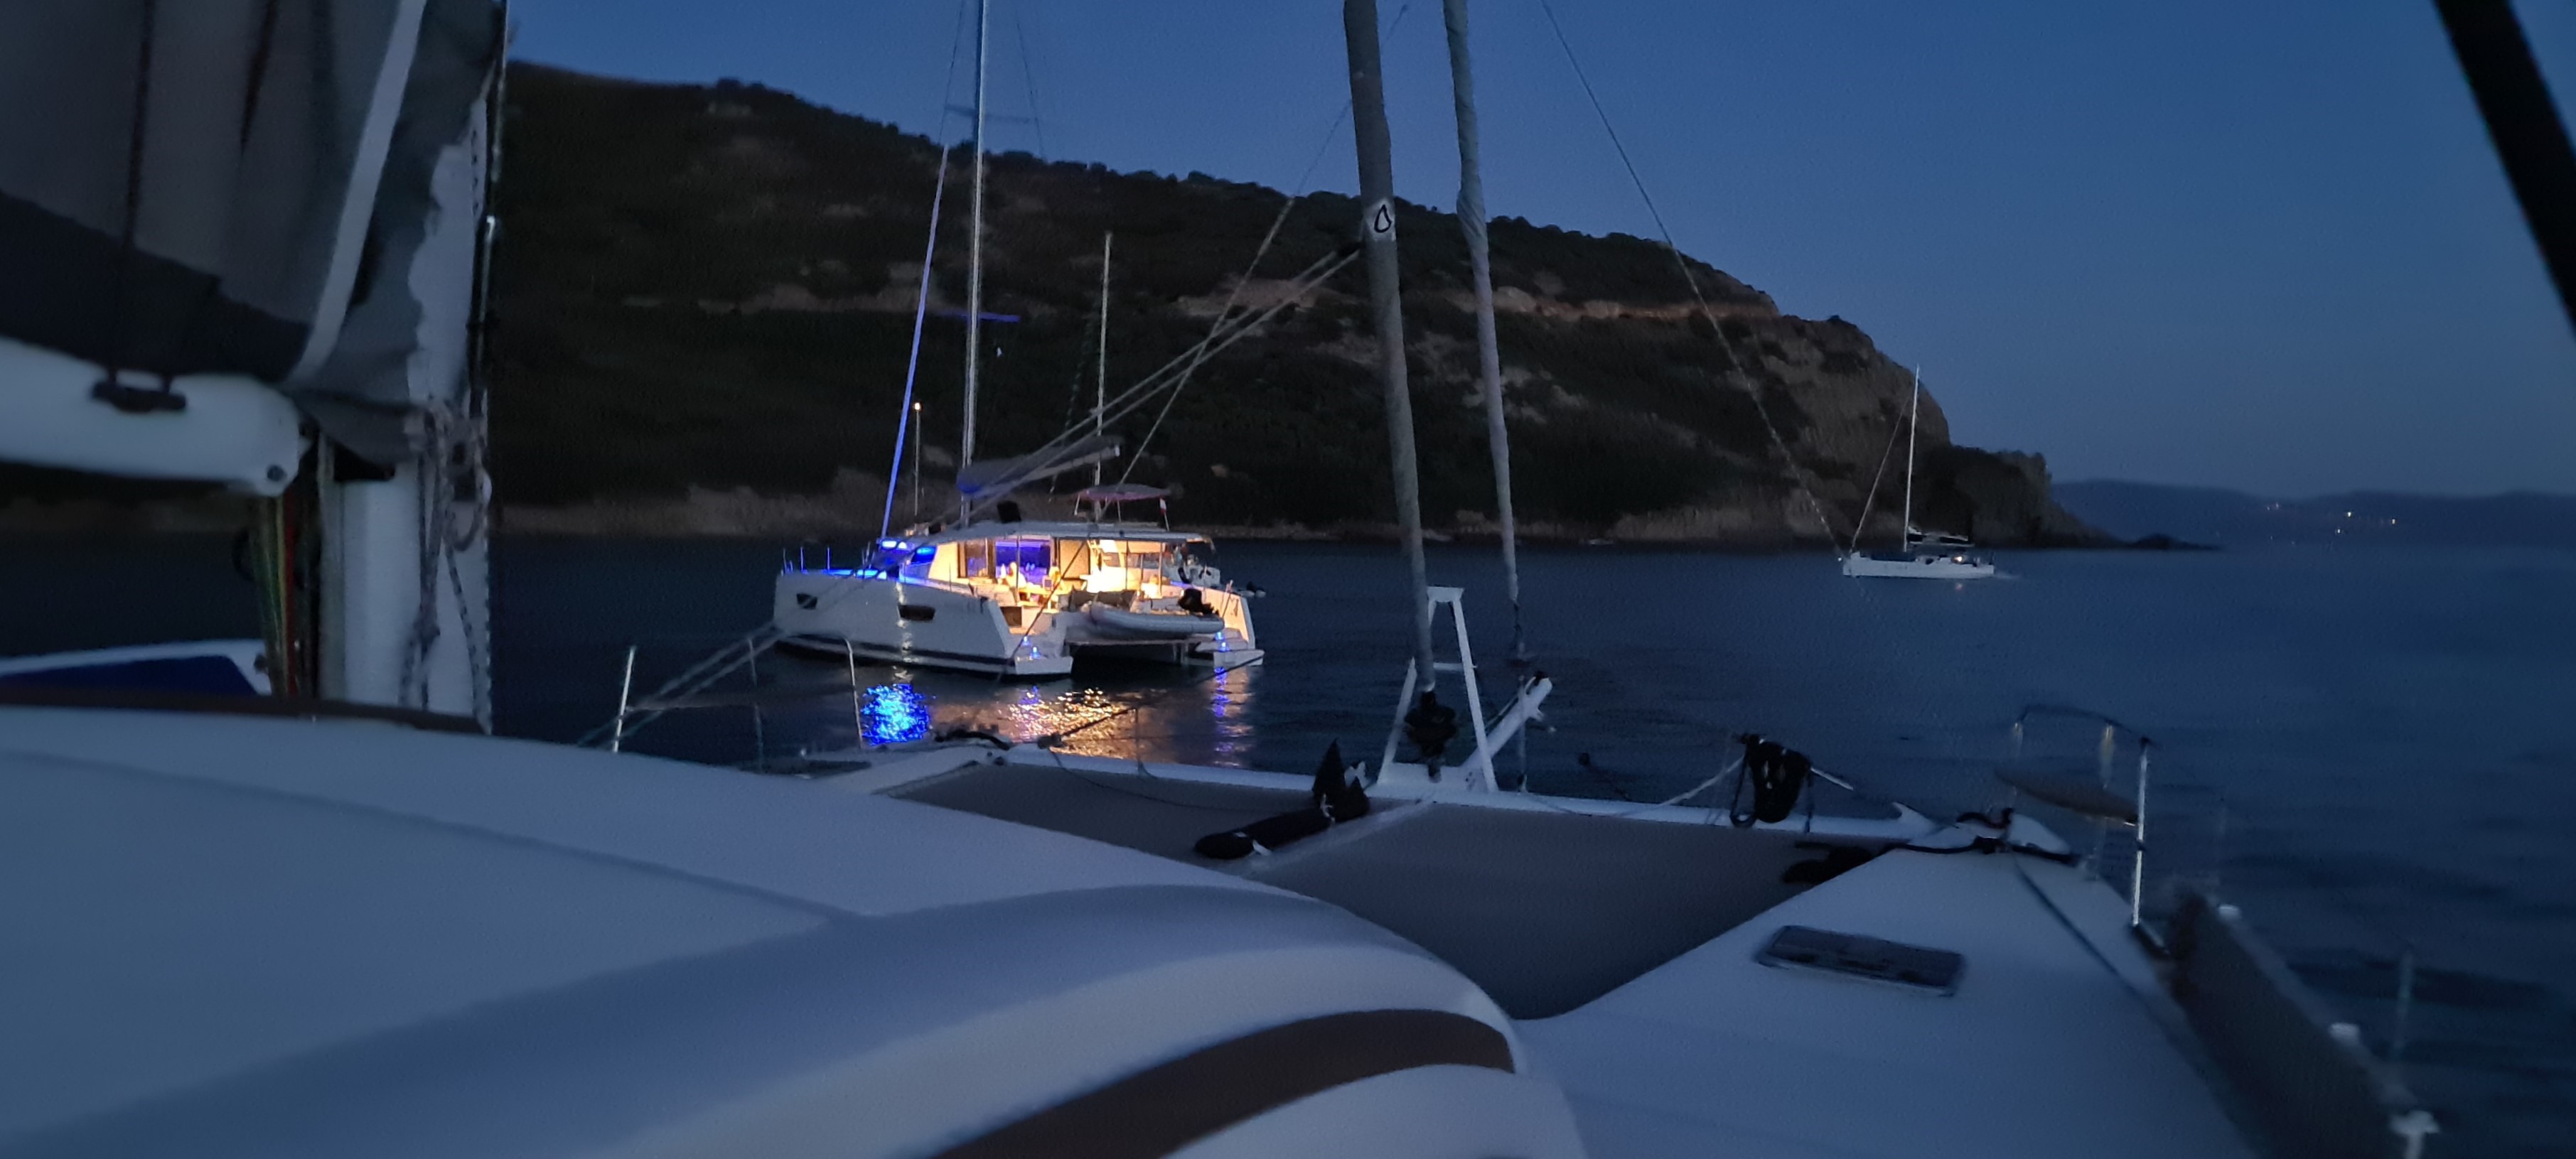 Anchorage by night in corsica